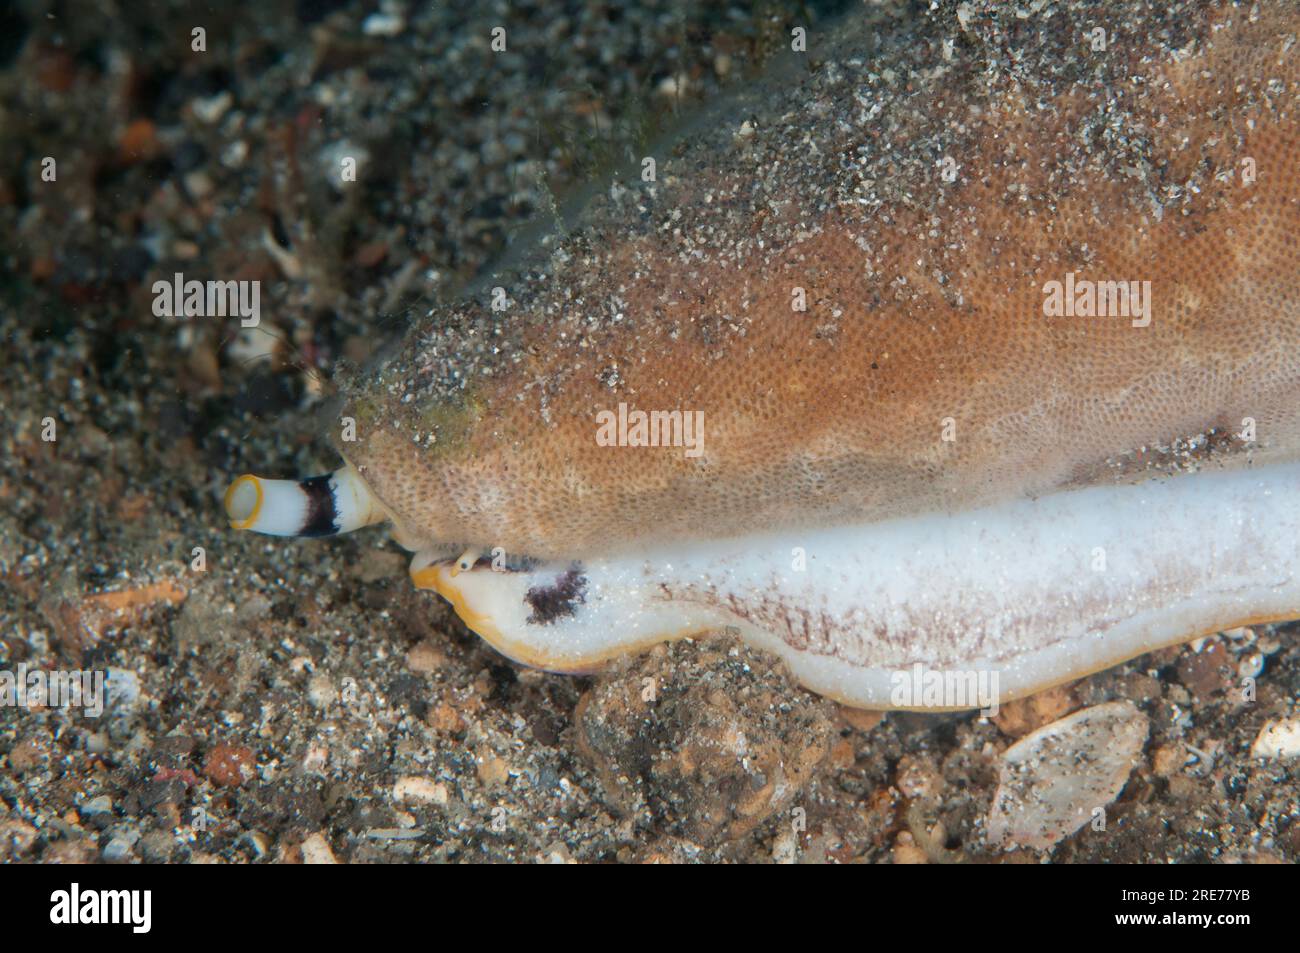 Siphon and eye poking out of venomous Cone Shell, Conus sp, on sand, Pantai Parigi dive site, Lembeh Straits, Sulawesi, Indonesia Stock Photo